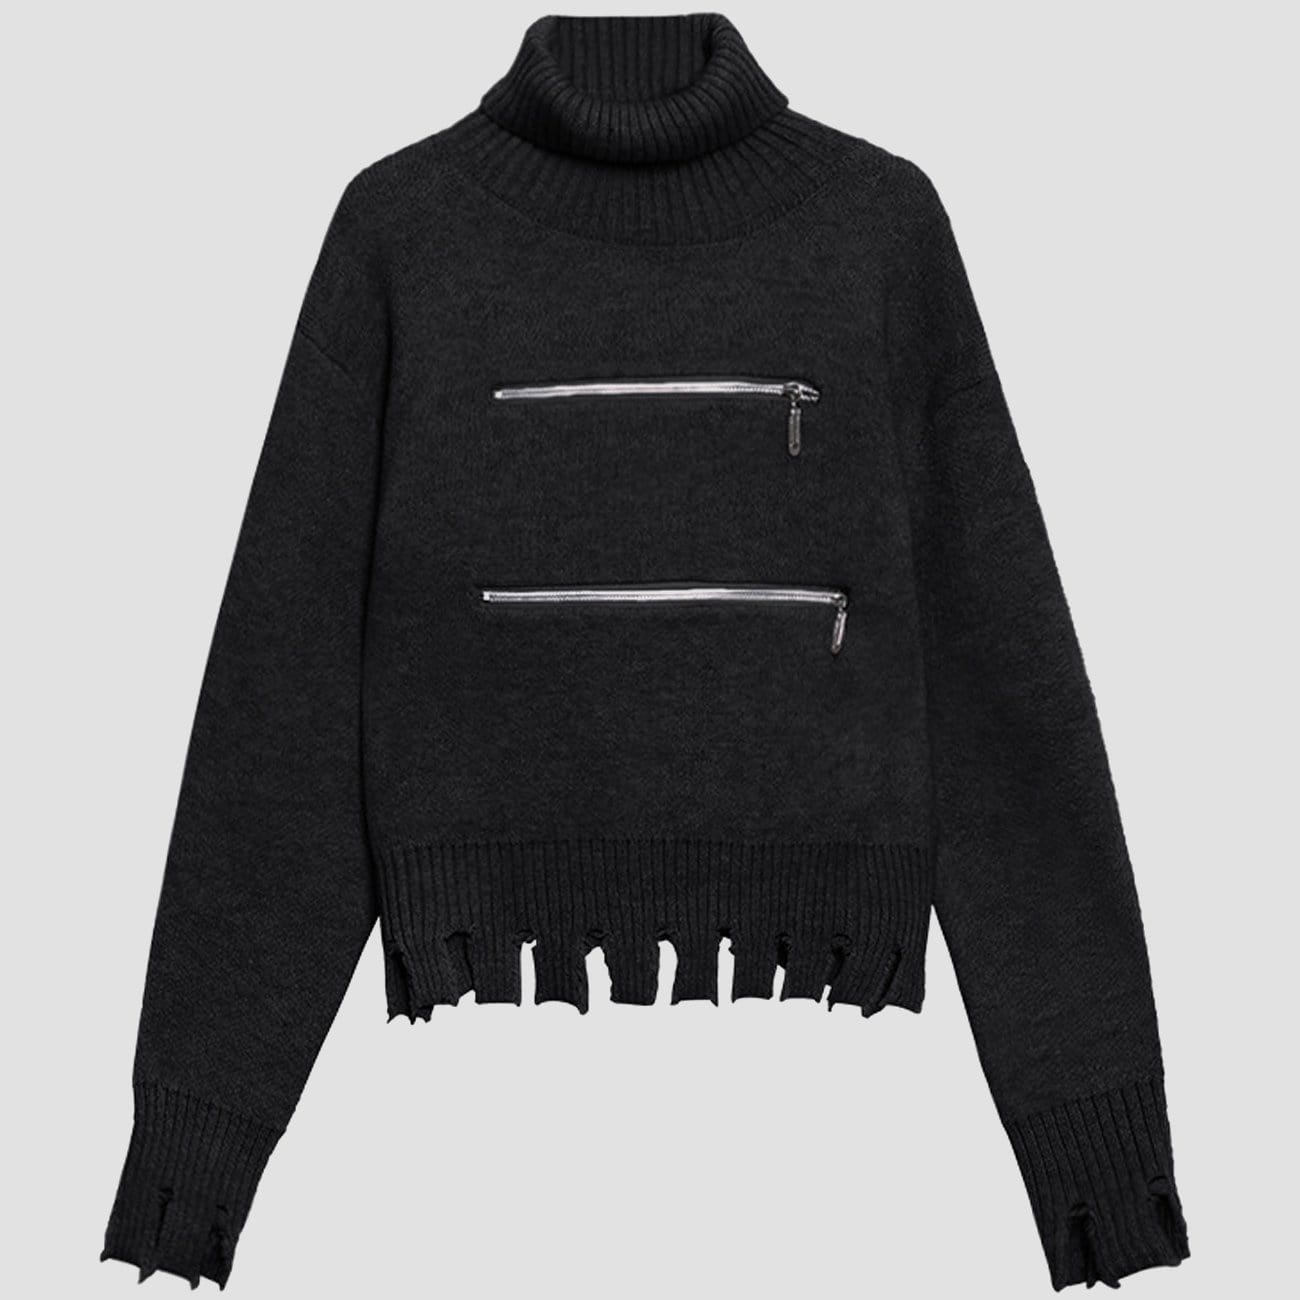 TO Zipper Turtleneck Knitted Sweater